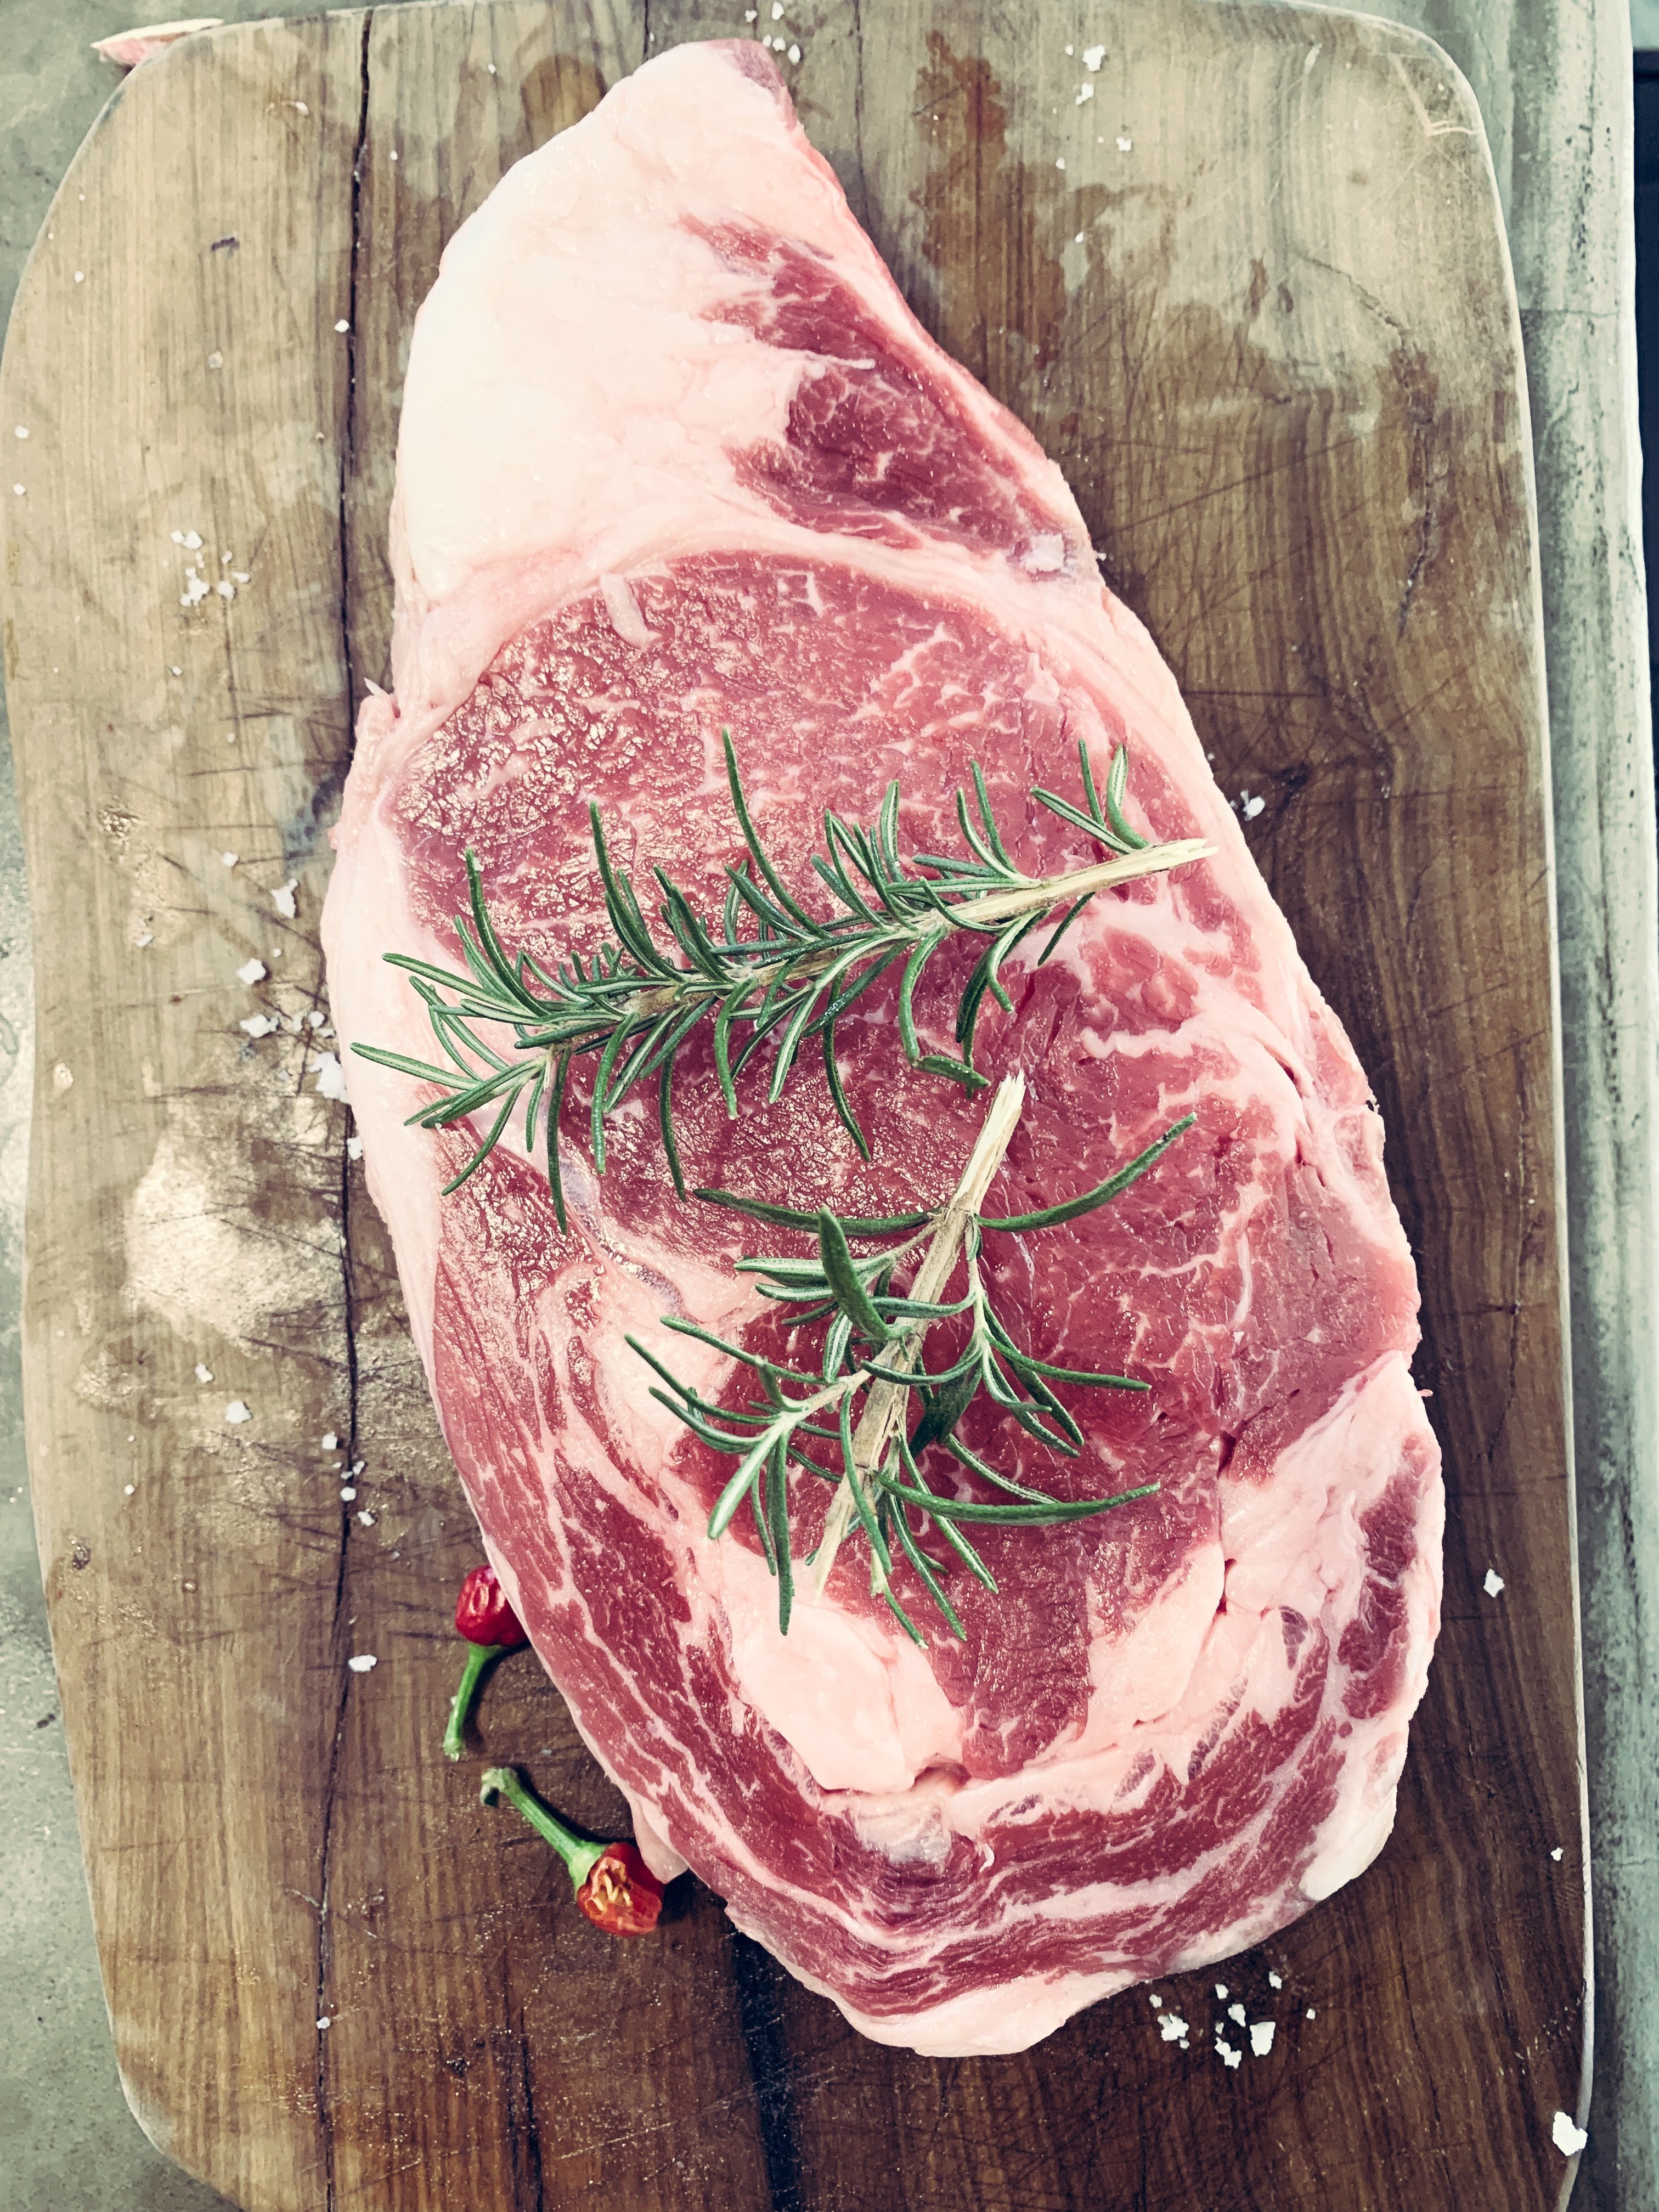 Big meat on a wooden surface with leaves on it | Source: Unsplash/Charlie Solorzano